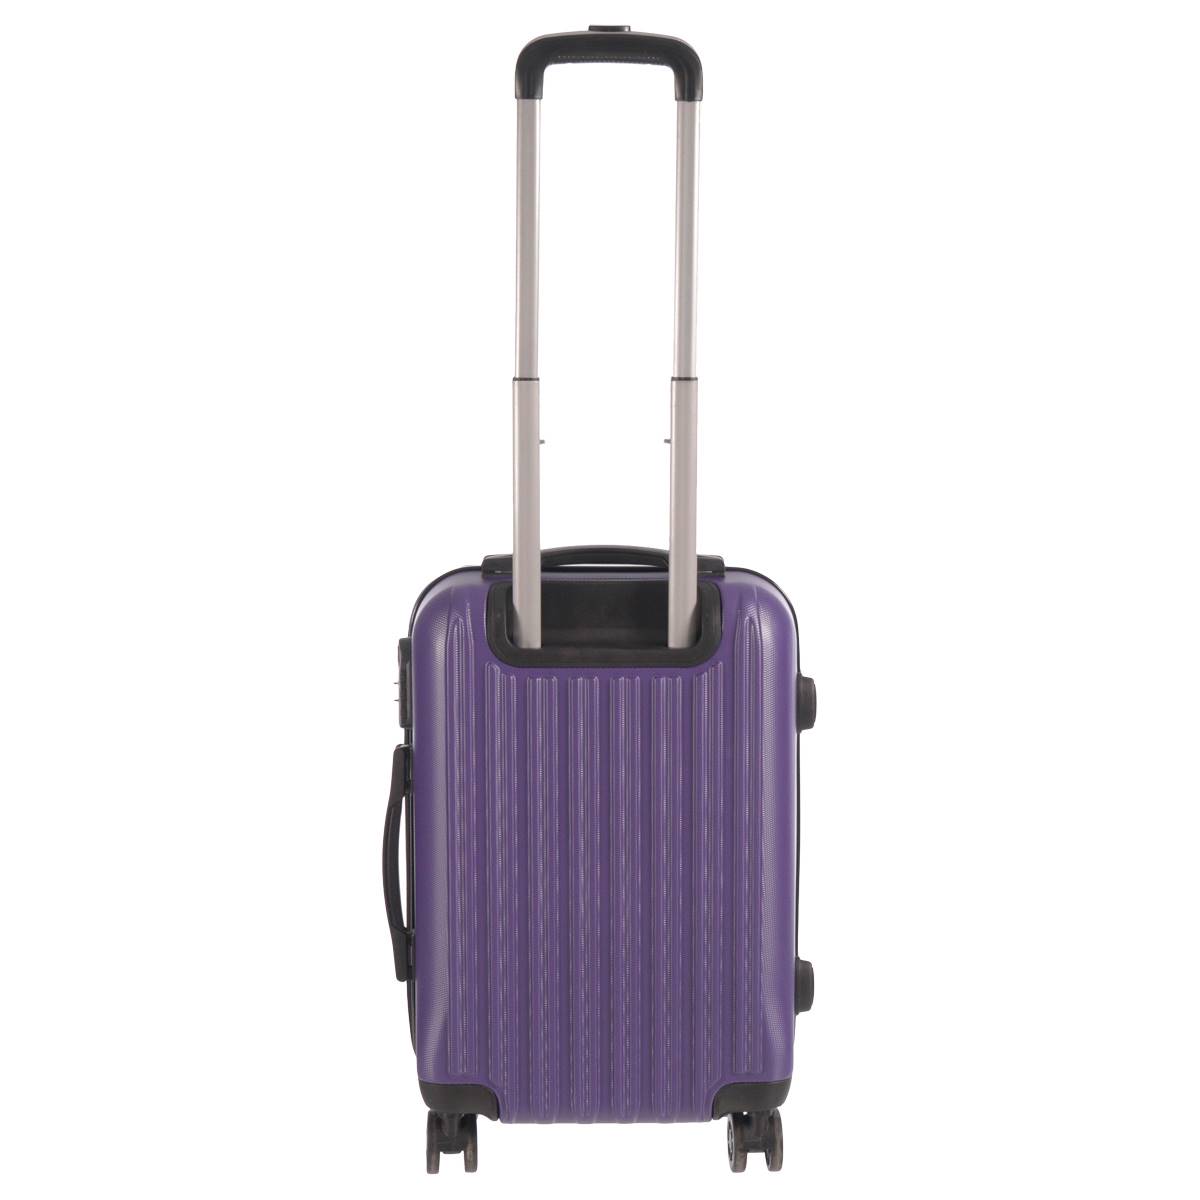 Club Rochelier Grove 20in. Hardside Spinner Carry-On Luggage